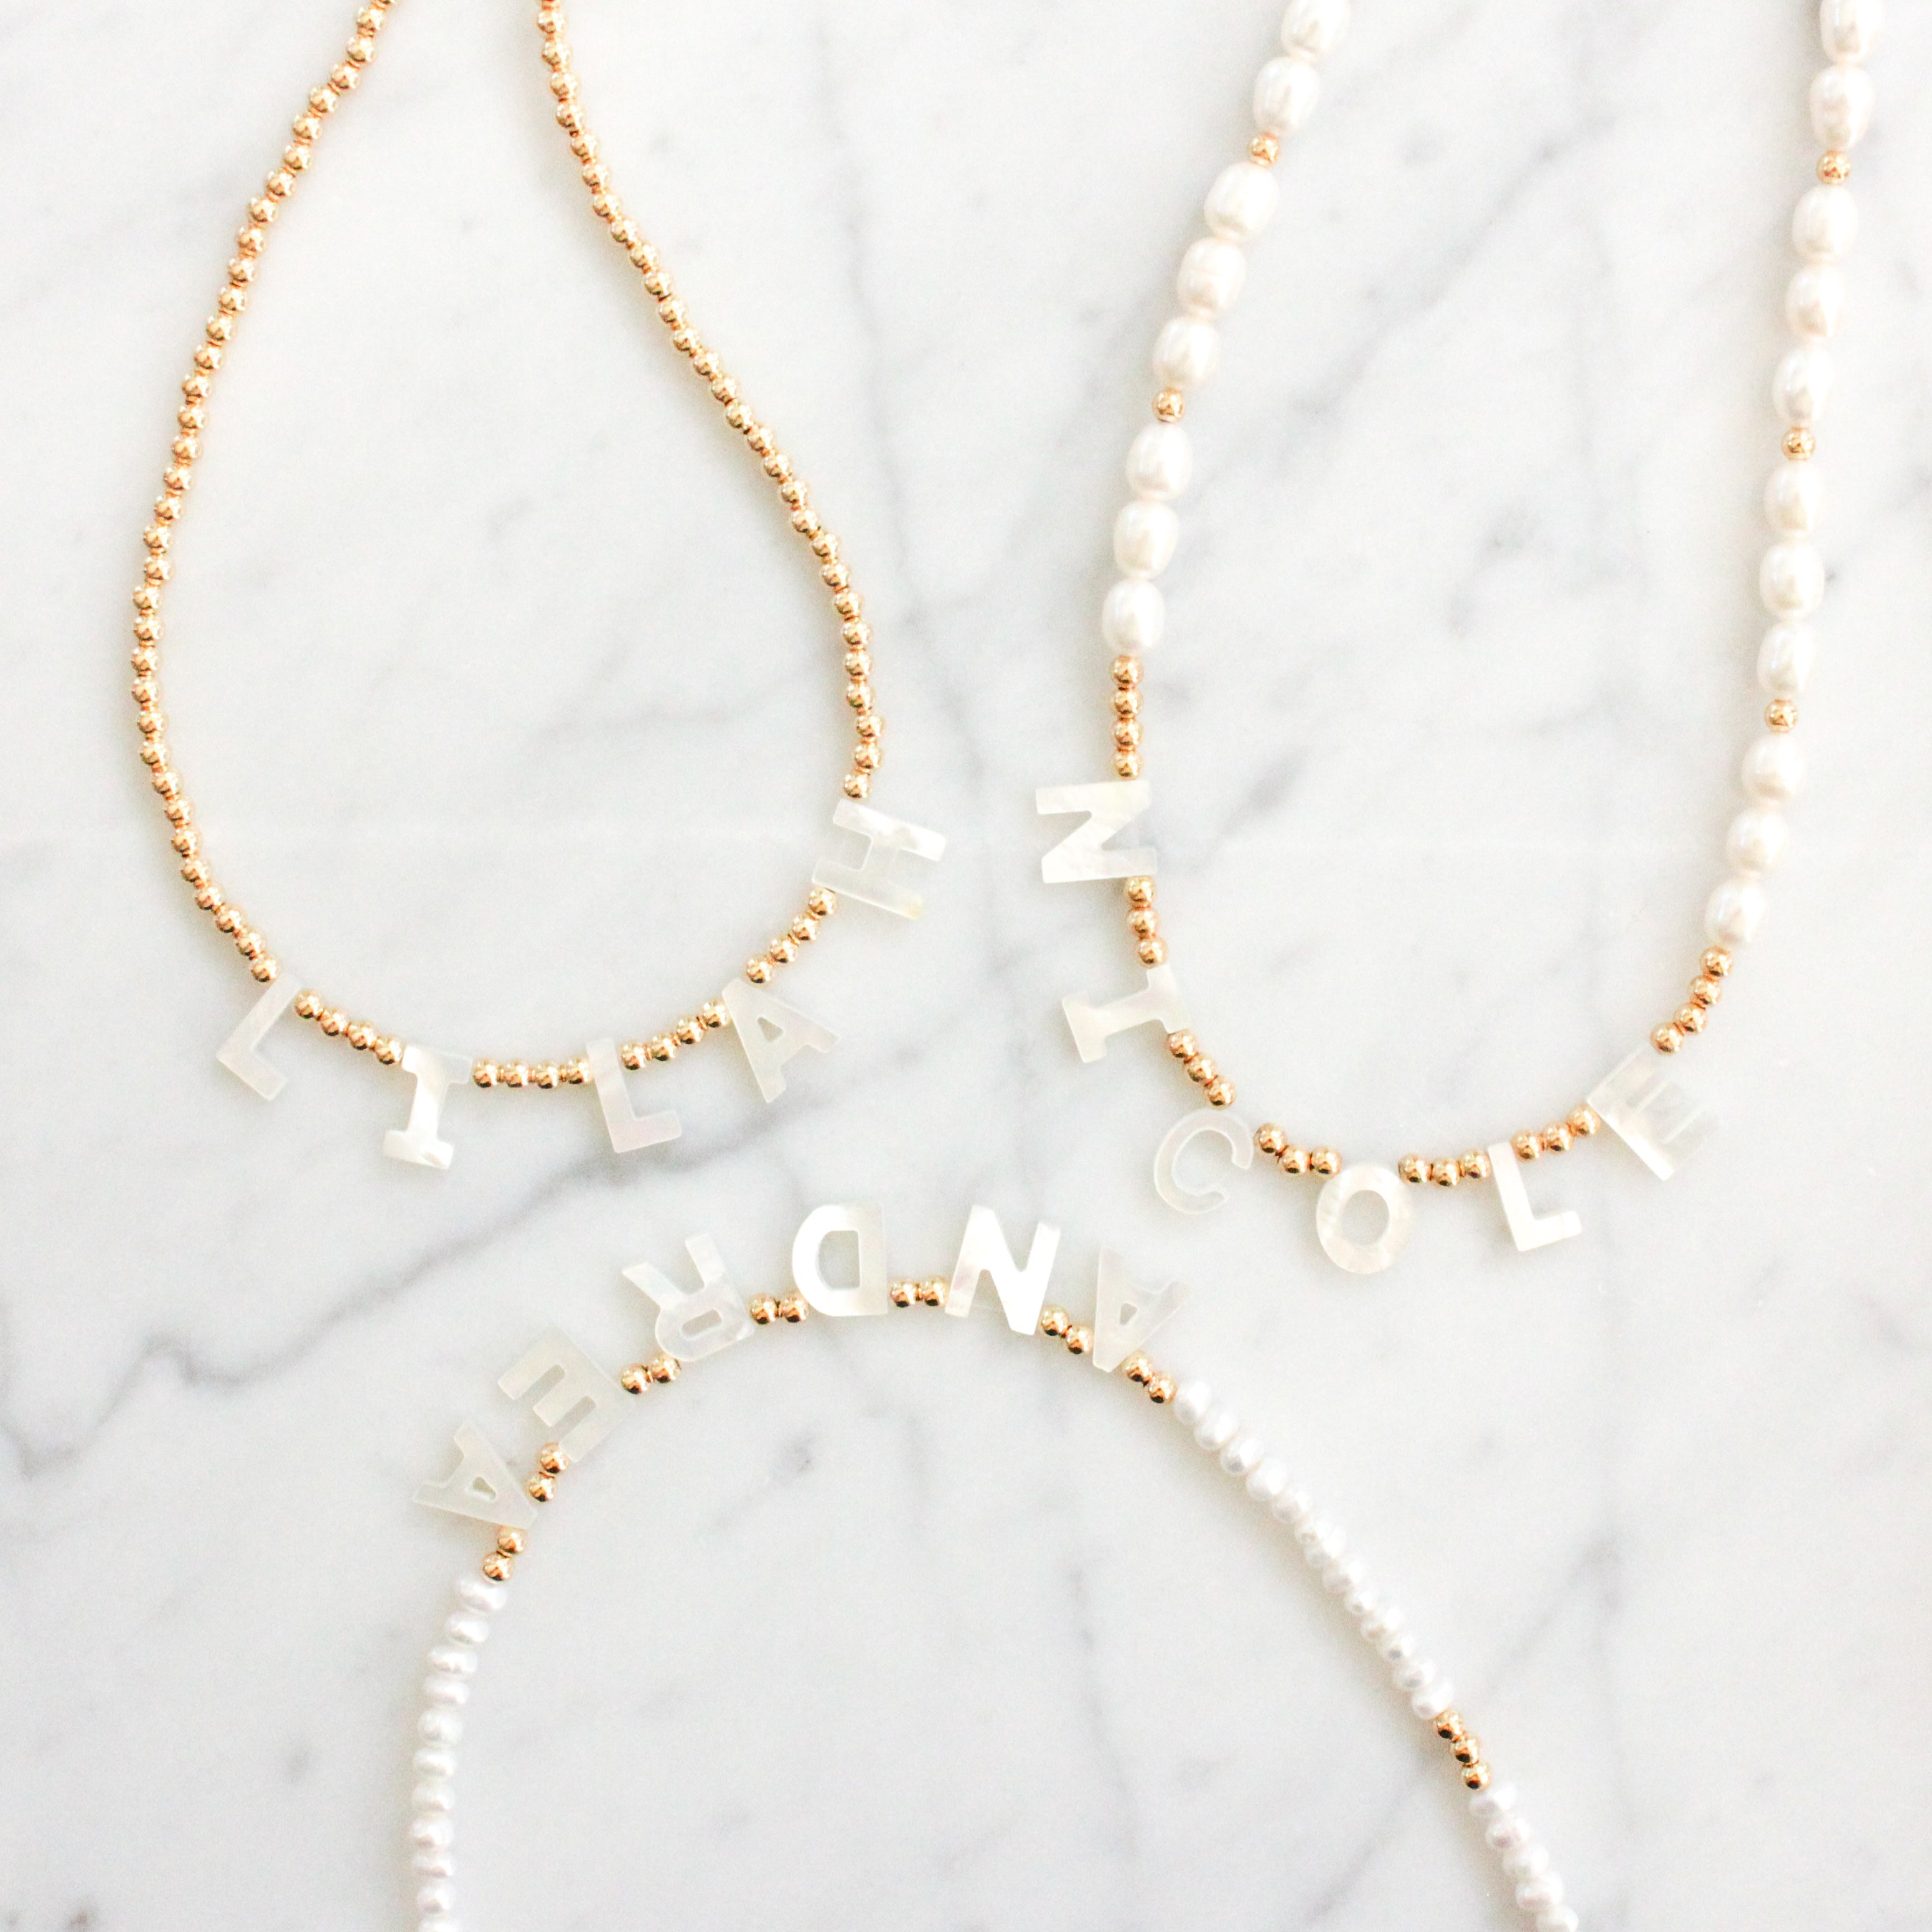 Build Your Own Nacre Initial | Handmade Jewelry | Cara O Sello